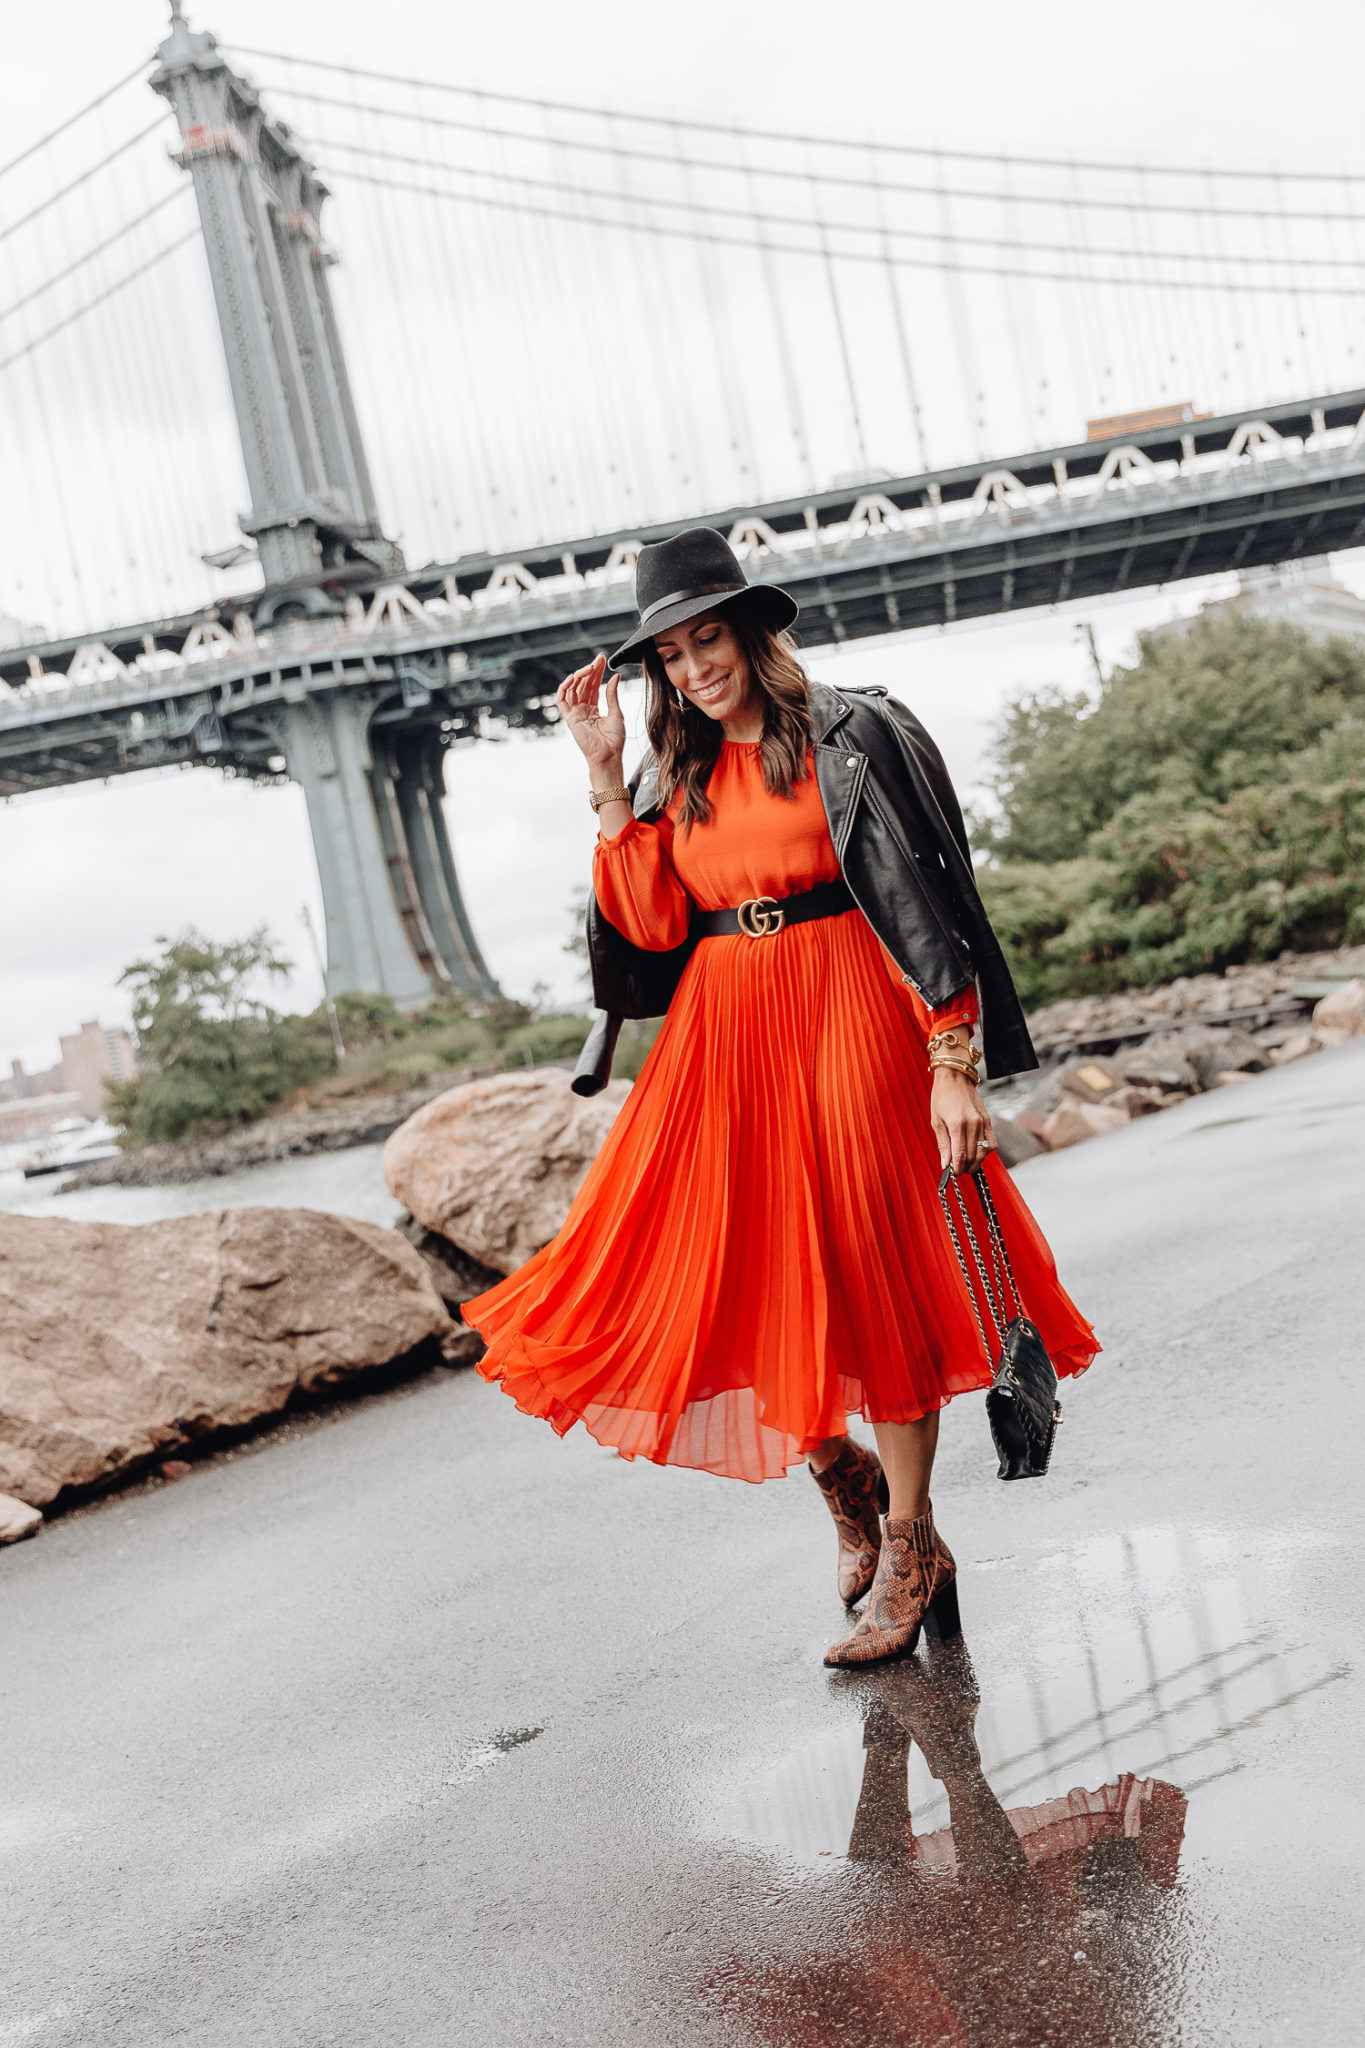 Amanda features fall style trends